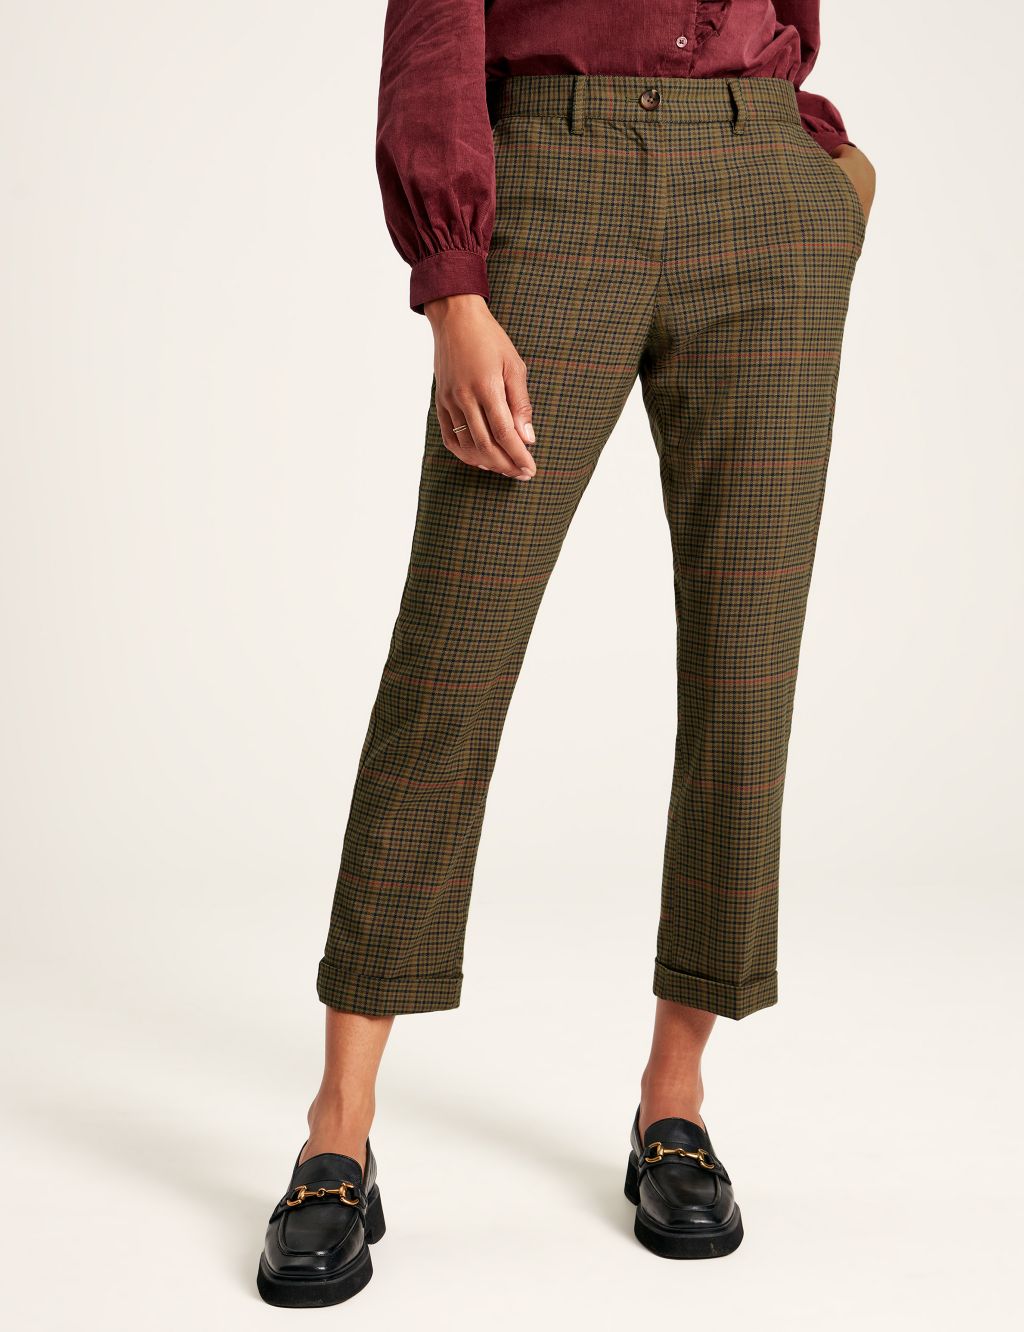 Wool Rich Checked Slim Fit Cropped Trousers image 1